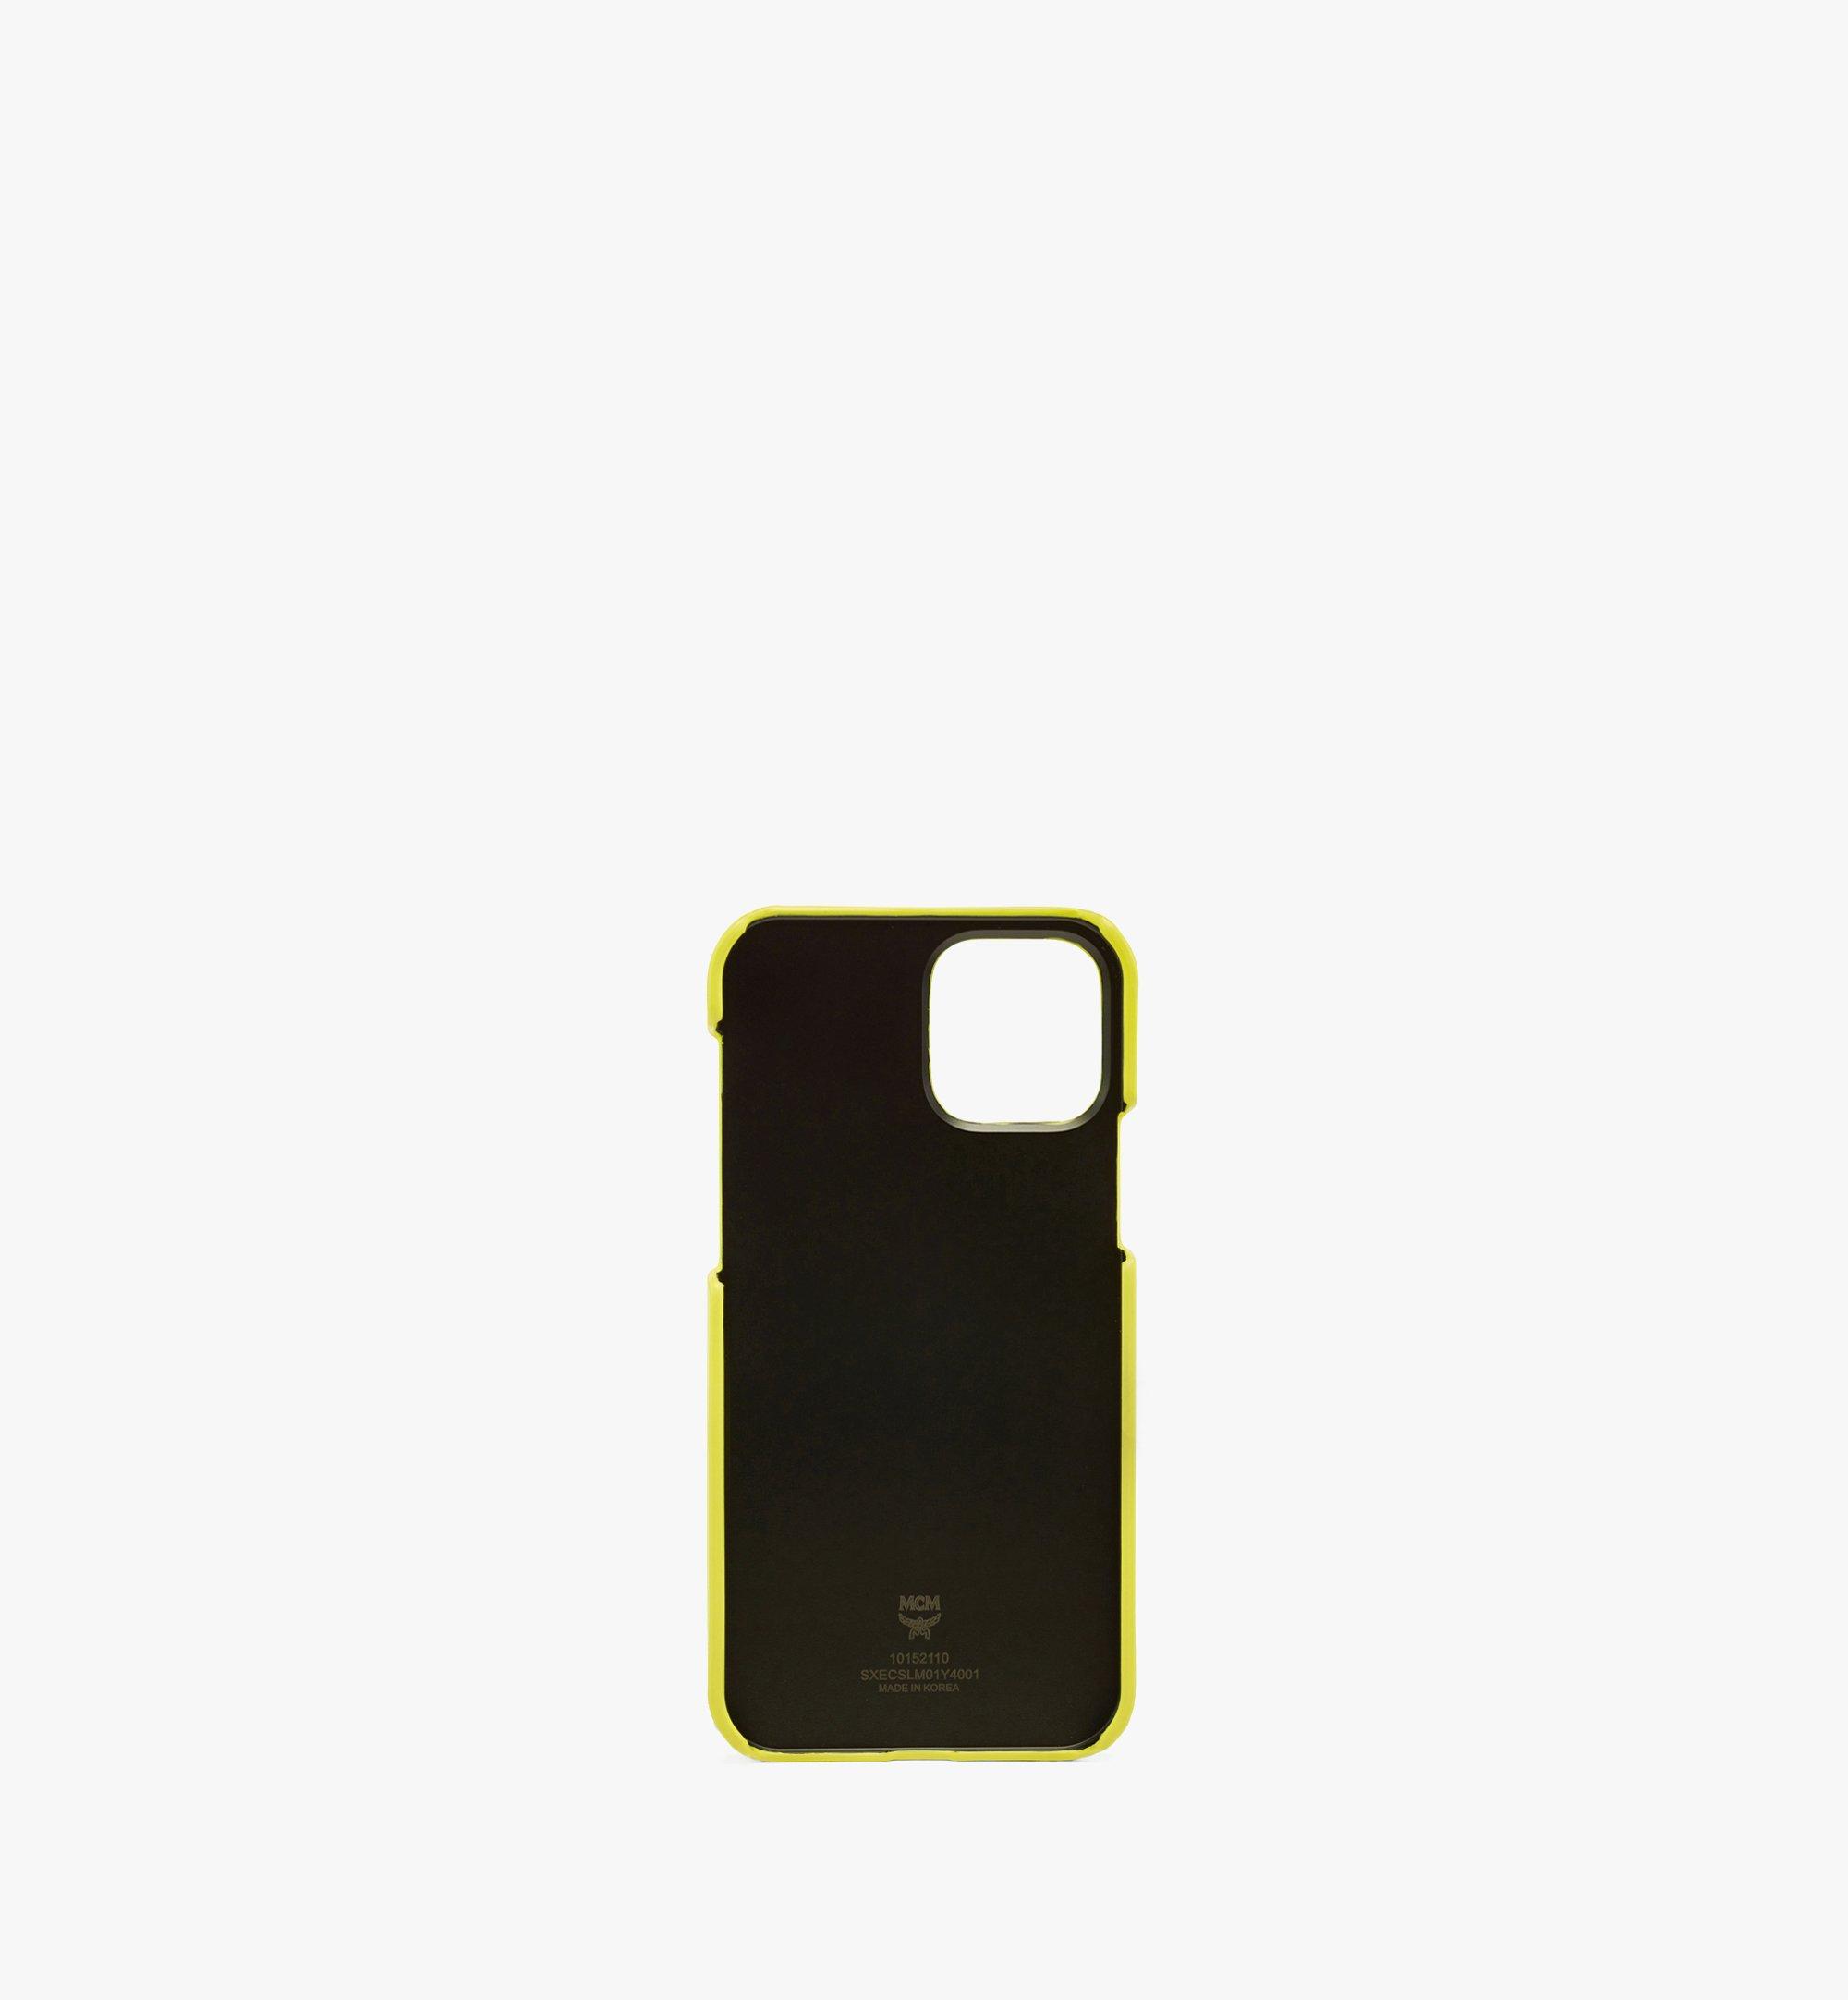 MCM Mode Mena iPhone 12/12 Pro Case with Pocket and Strap Yellow MXECSLM01Y4001 Alternate View 1